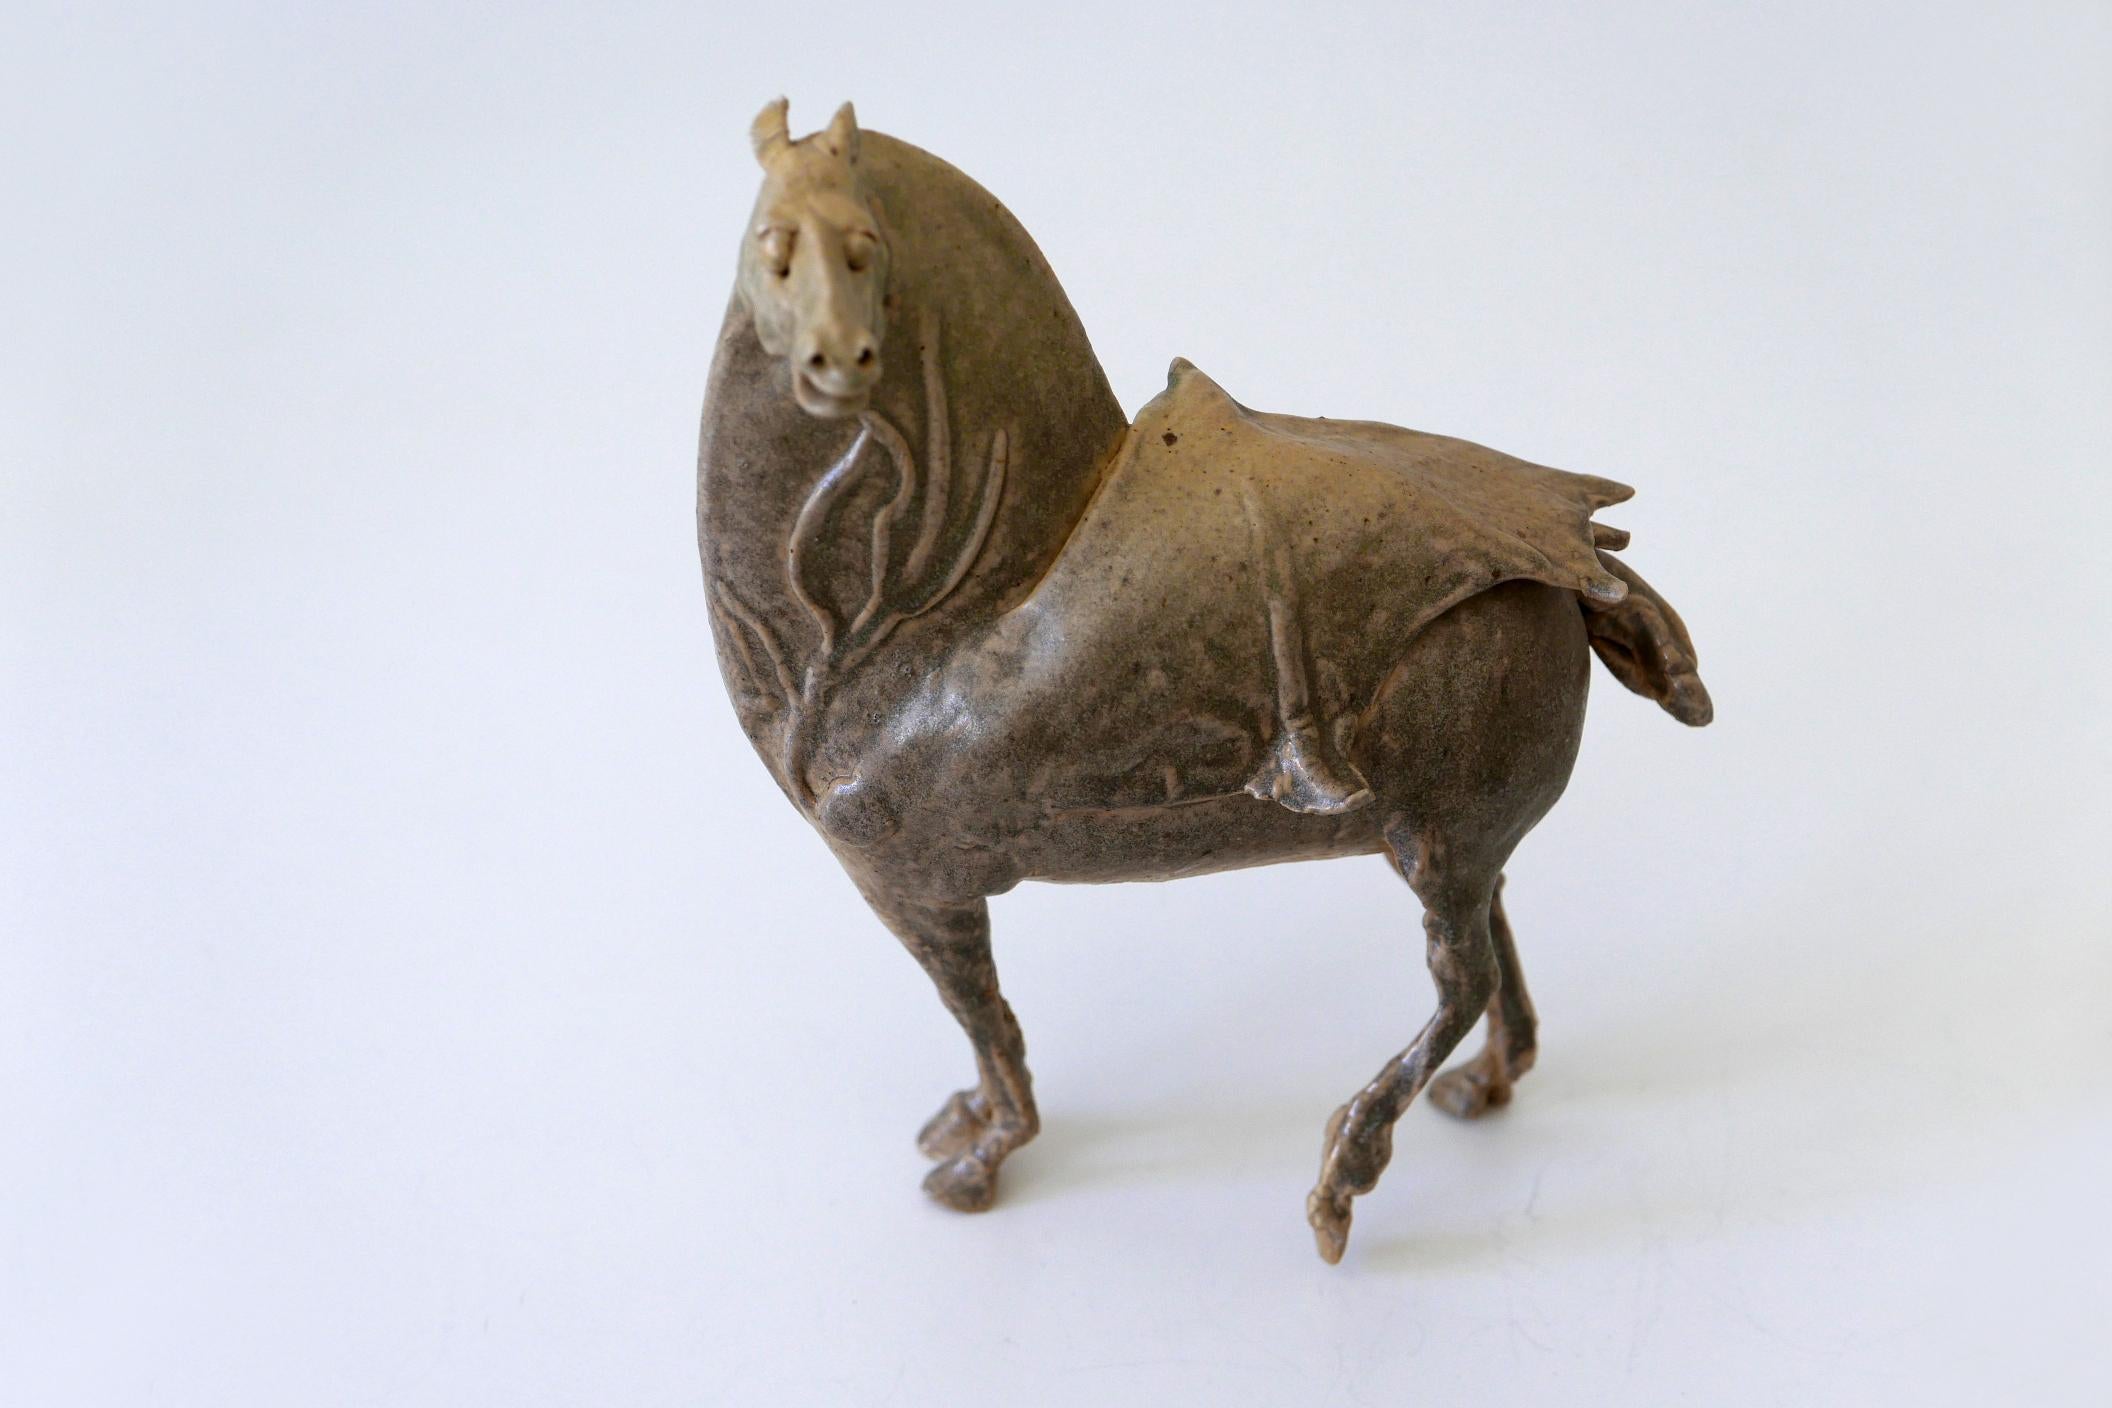 Lovely glazed pottery figure of a horse by the German artist Harro Frey, (1941-2011). Very high artistic quality.

Dimensions: 
H 8.66 in. x W 7.08 in. x D 3.34 in. / H 22 cm x W 18 cm x D 8.5 cm

Good condition. No damage.